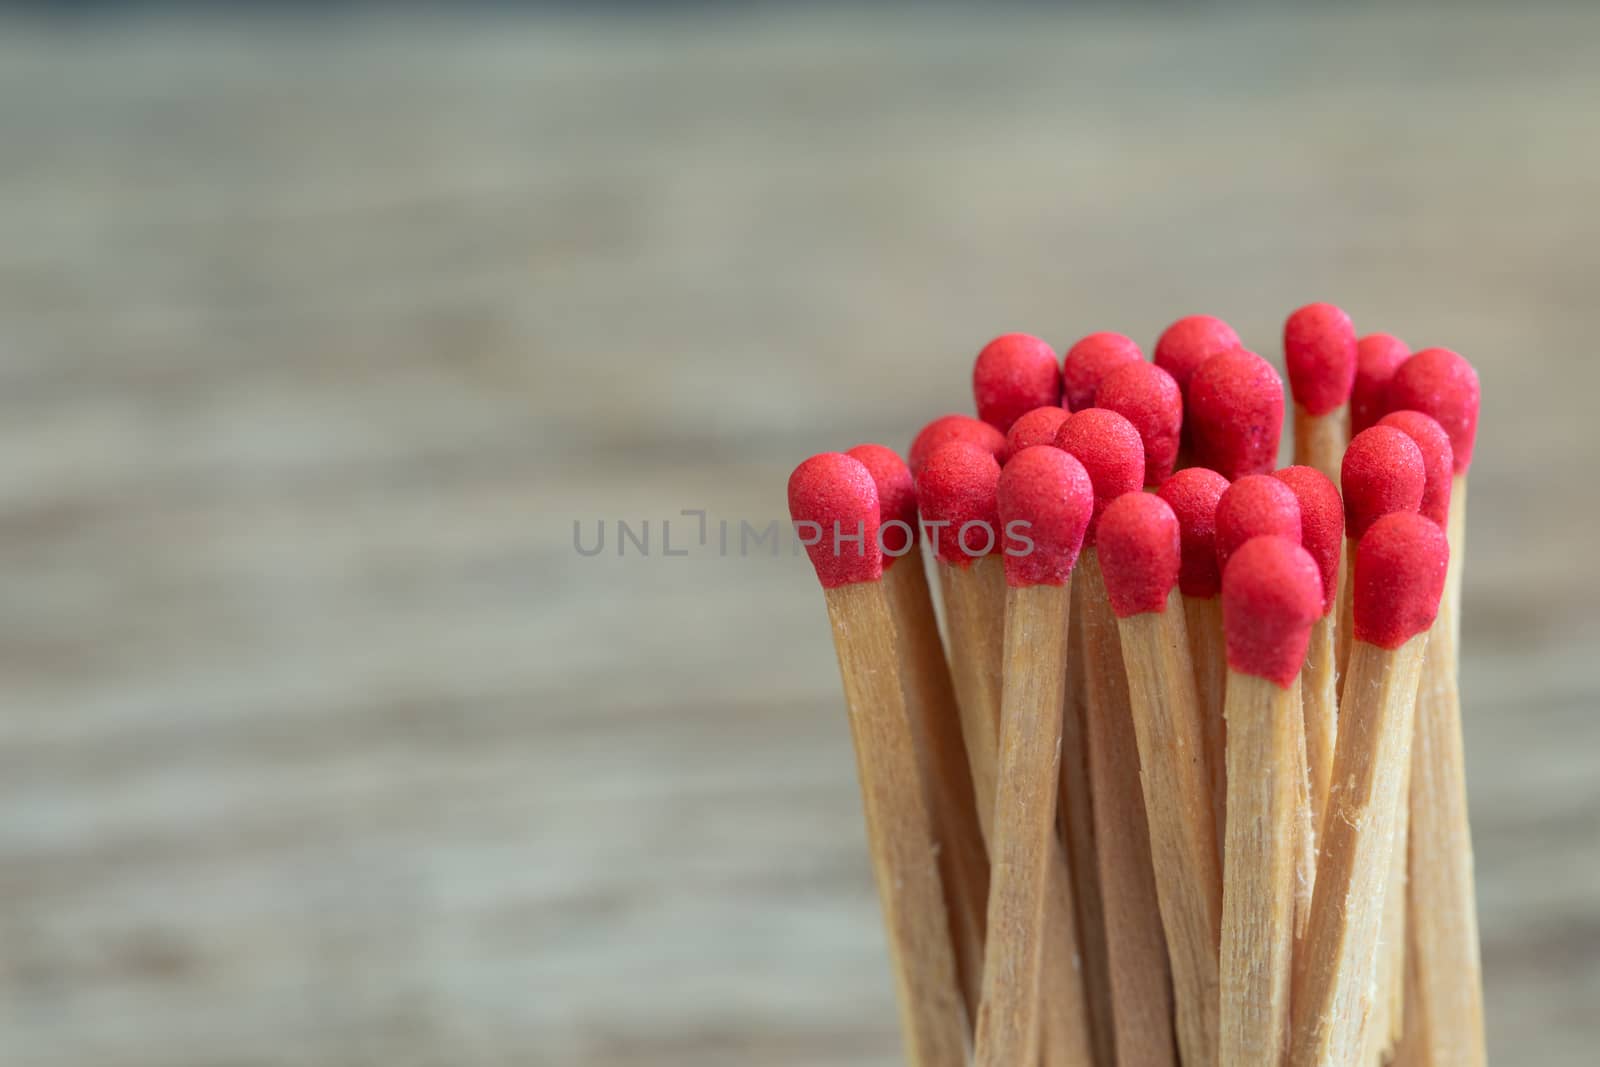 Group of matches on a blurred background by Natstocker